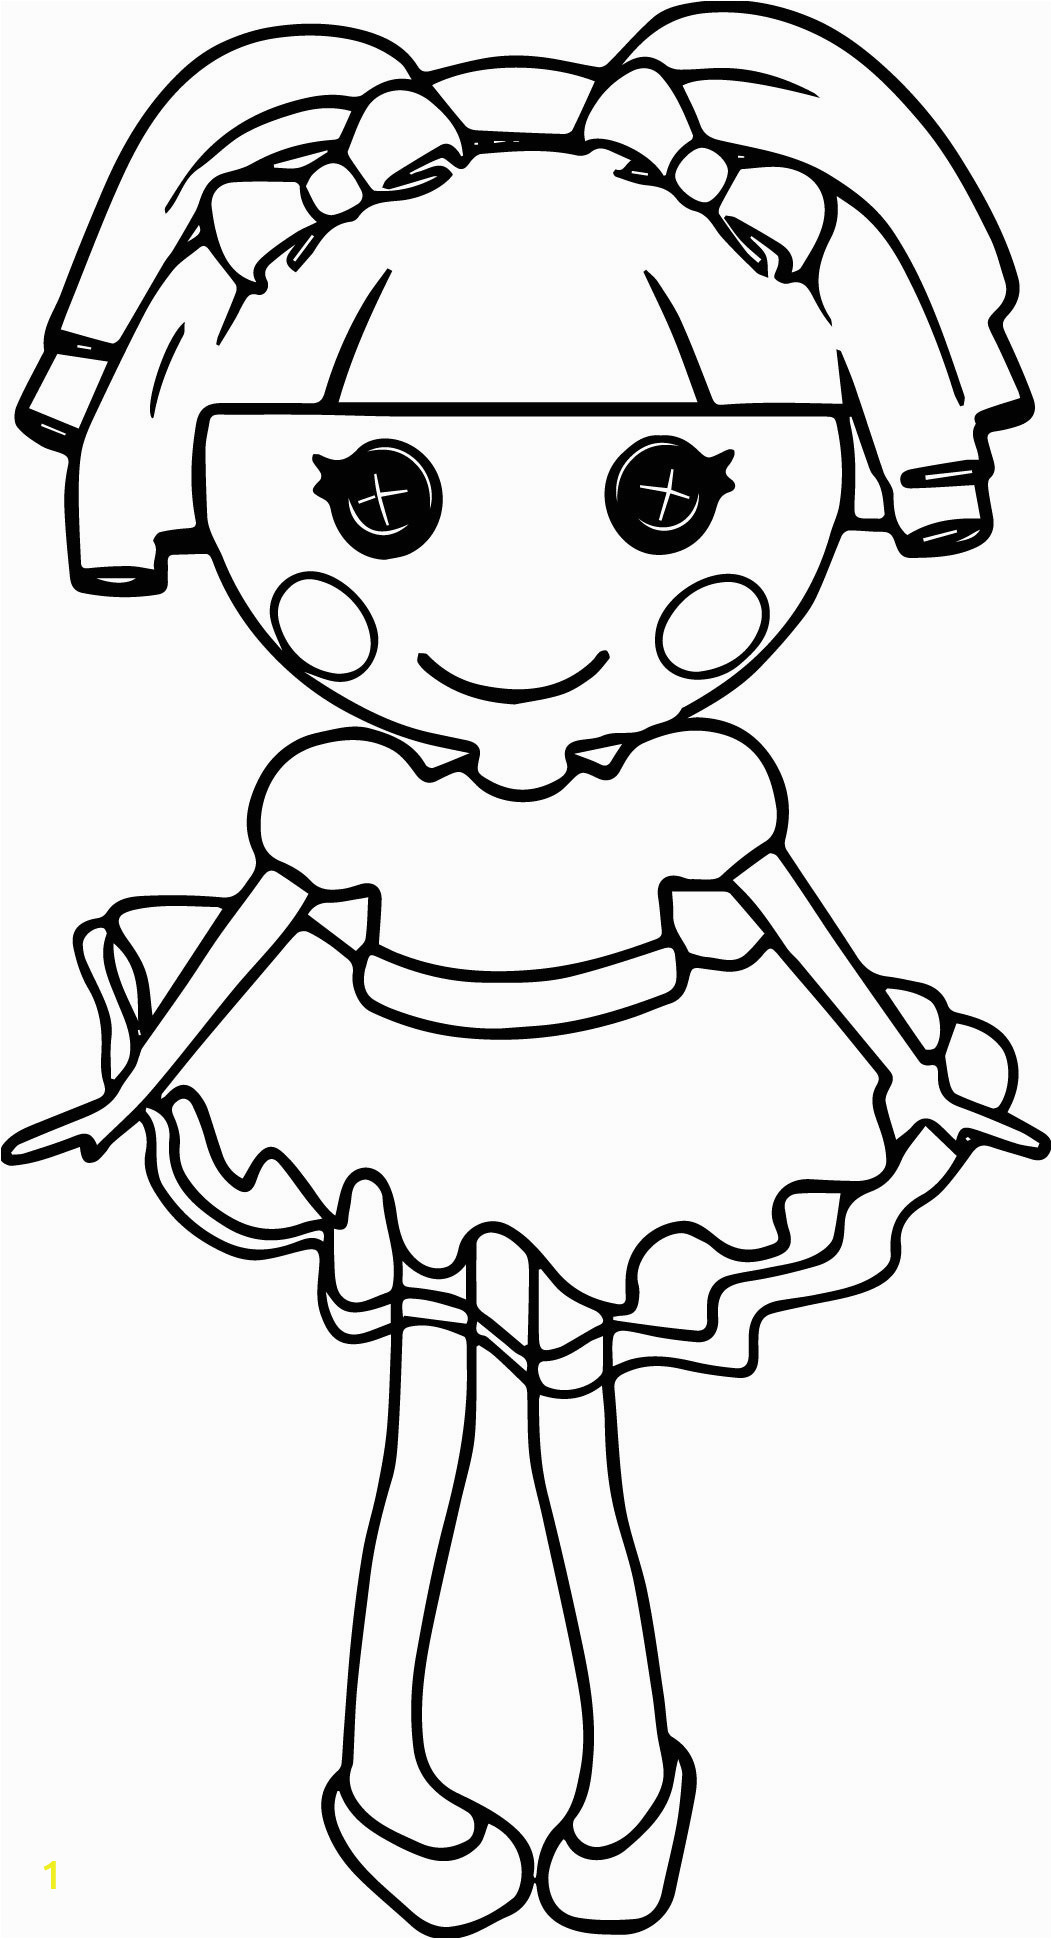 Free Coloring Pages Of Lalaloopsy Dolls Lalaloopsy Dolls Coloring Pages at Getcolorings